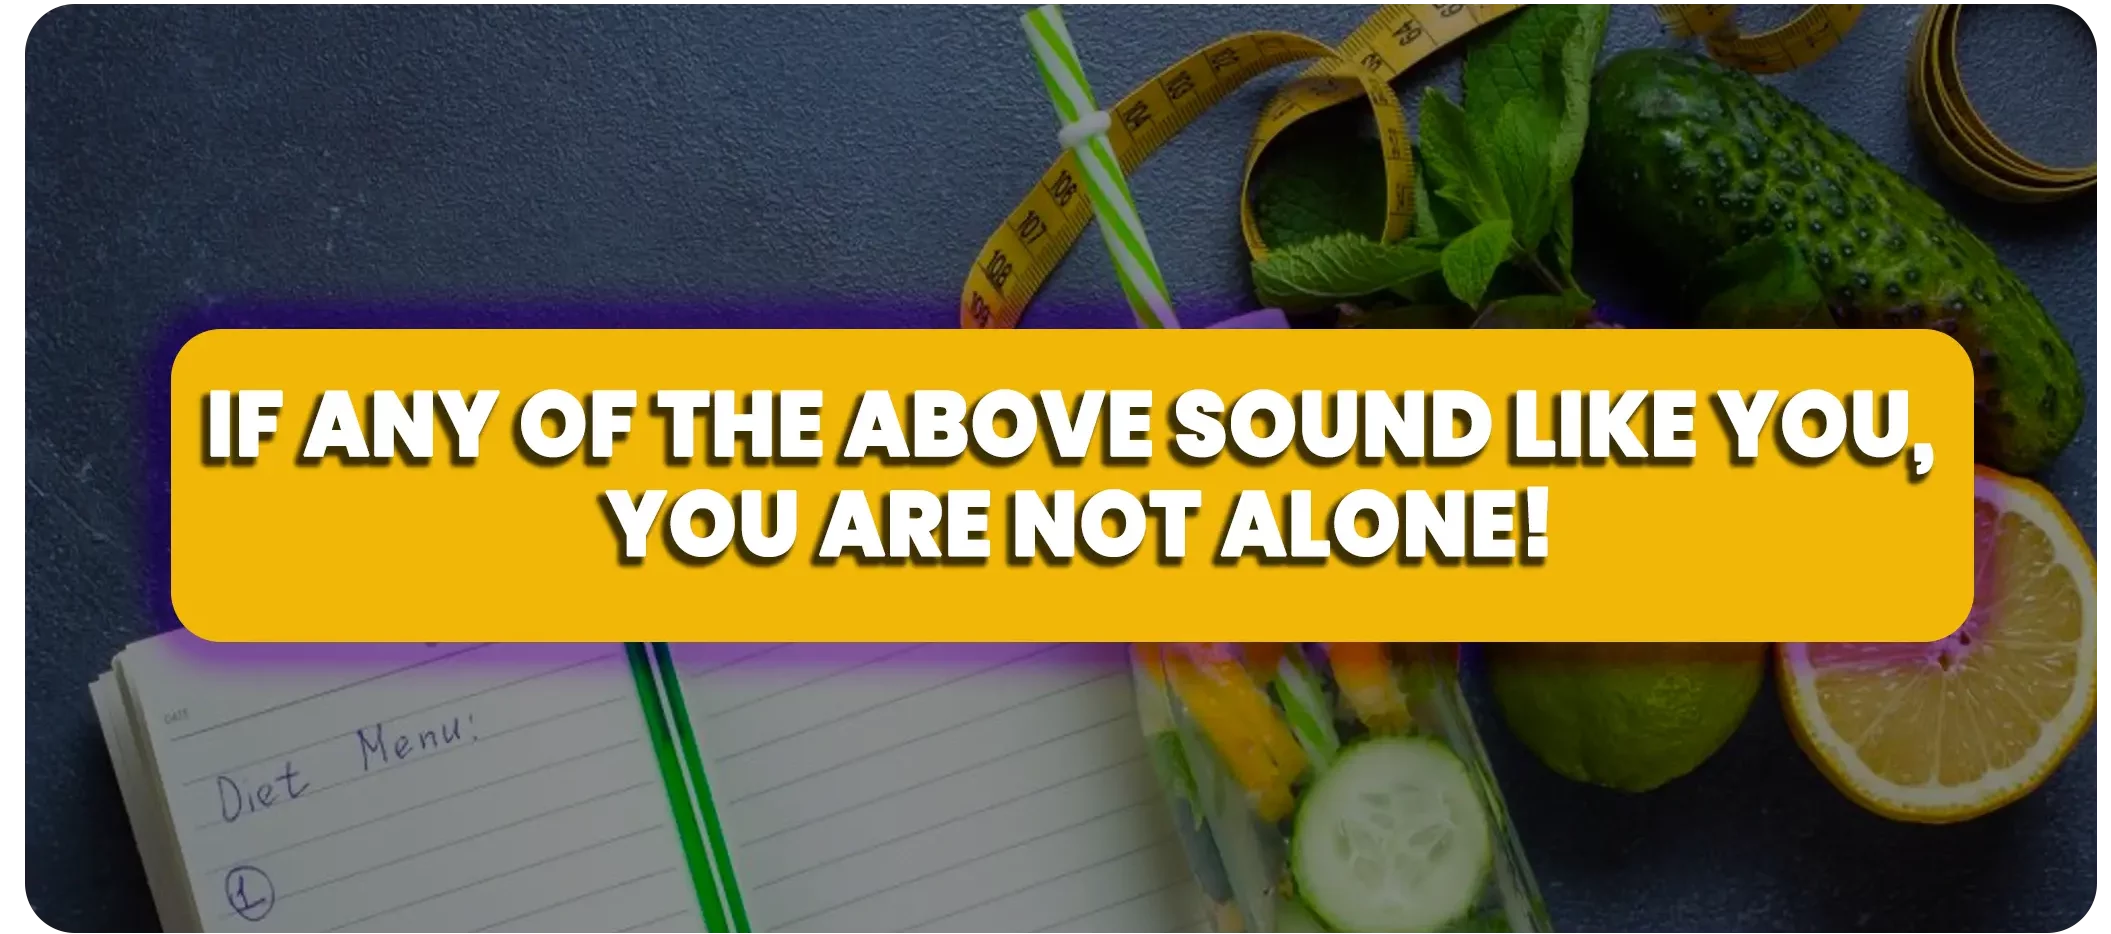 banner with text reminding you are not alone on your health journey